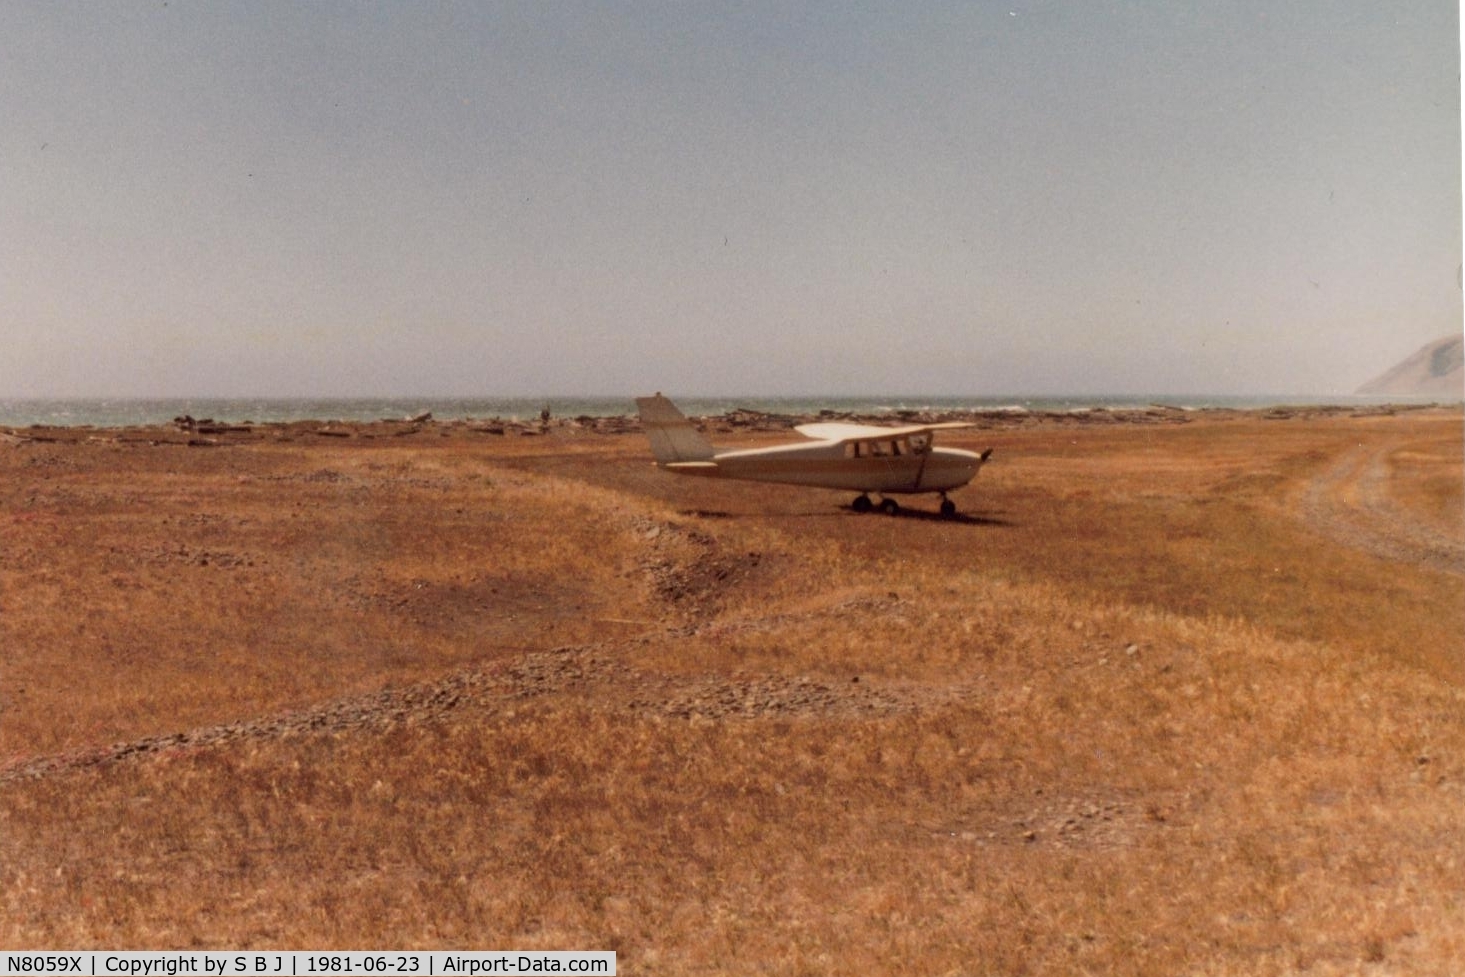 N8059X, 1961 Cessna 172B C/N 17248559, 59X at Big Flat (6 miles north of Shelter Cove,Ca) in 1981.Was used by many pilots for fly ins & camping until it became a national wilderness area known as The Lost Coast. O well.